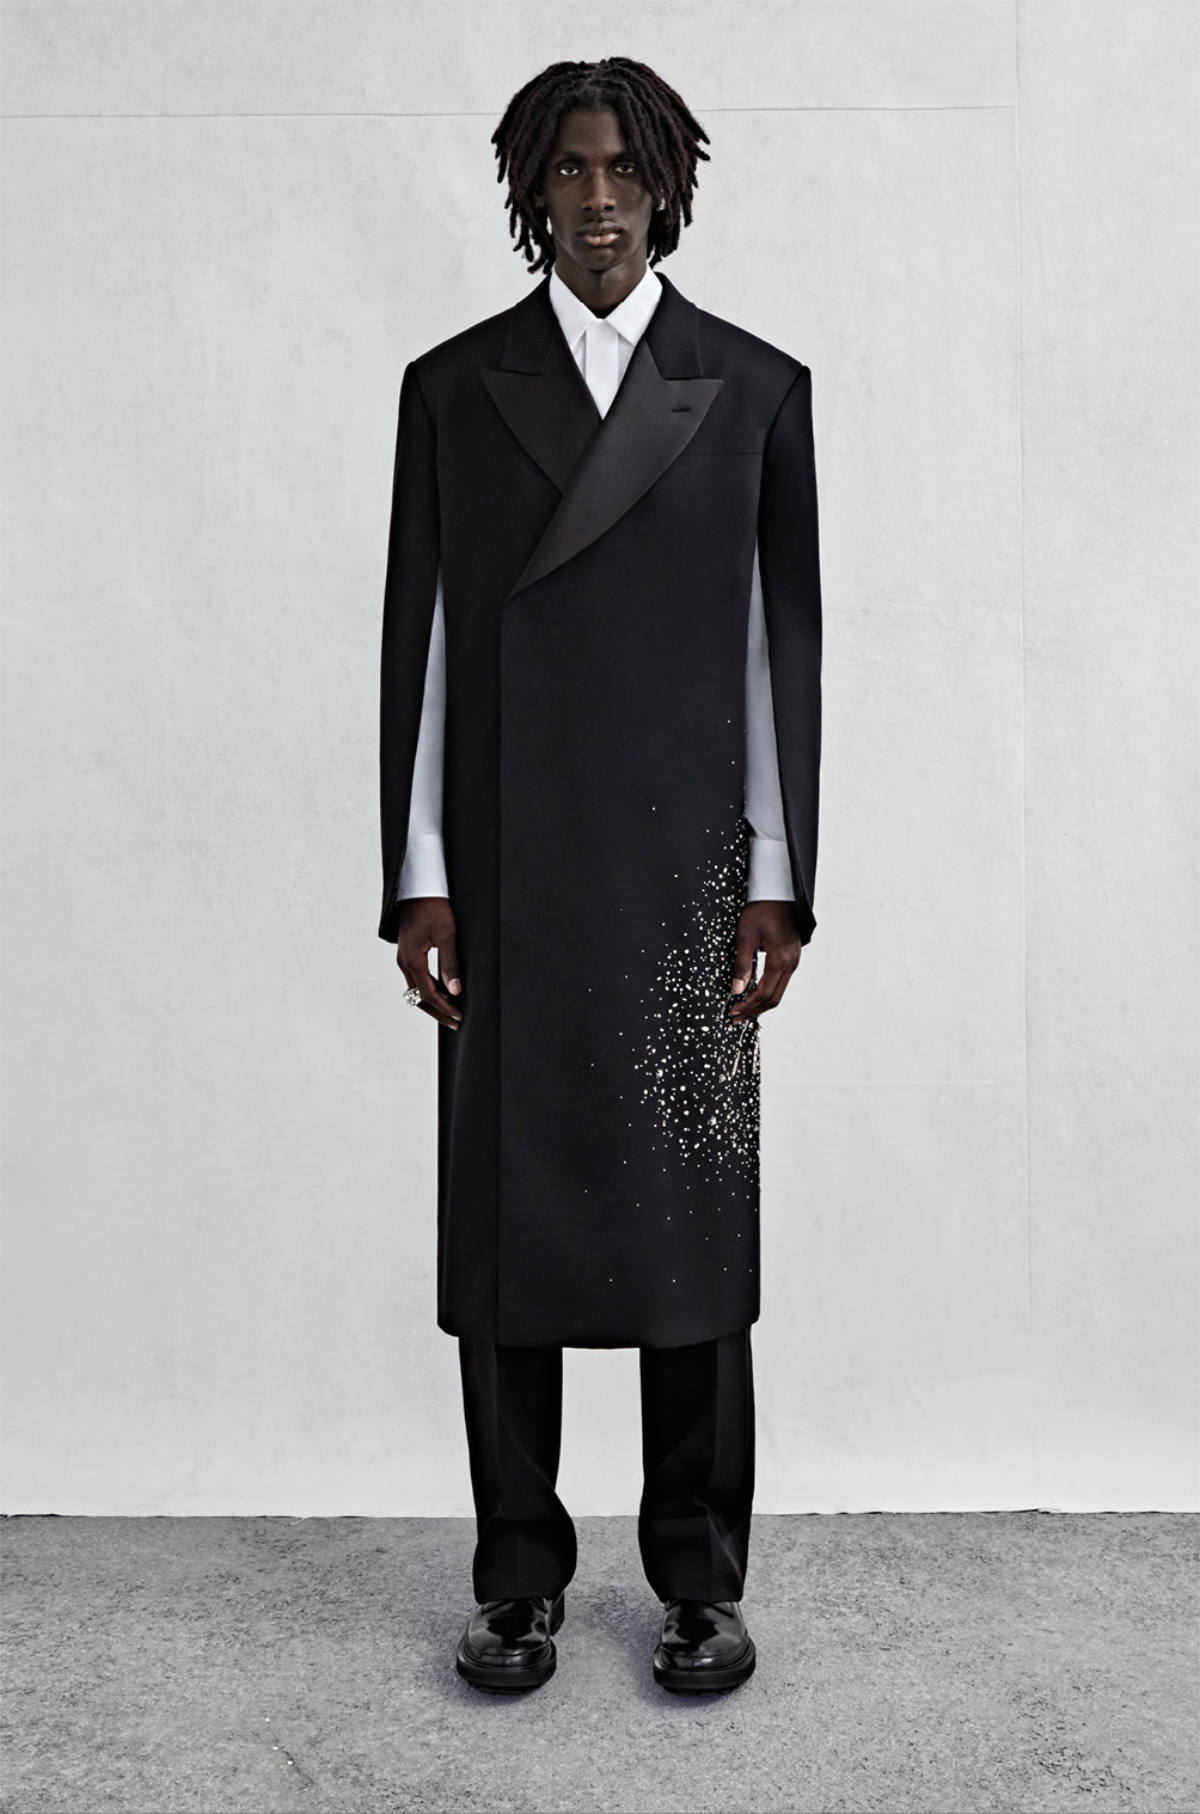 Alexander McQueen Presents Its New Spring/Summer 2023 Menswear Collection